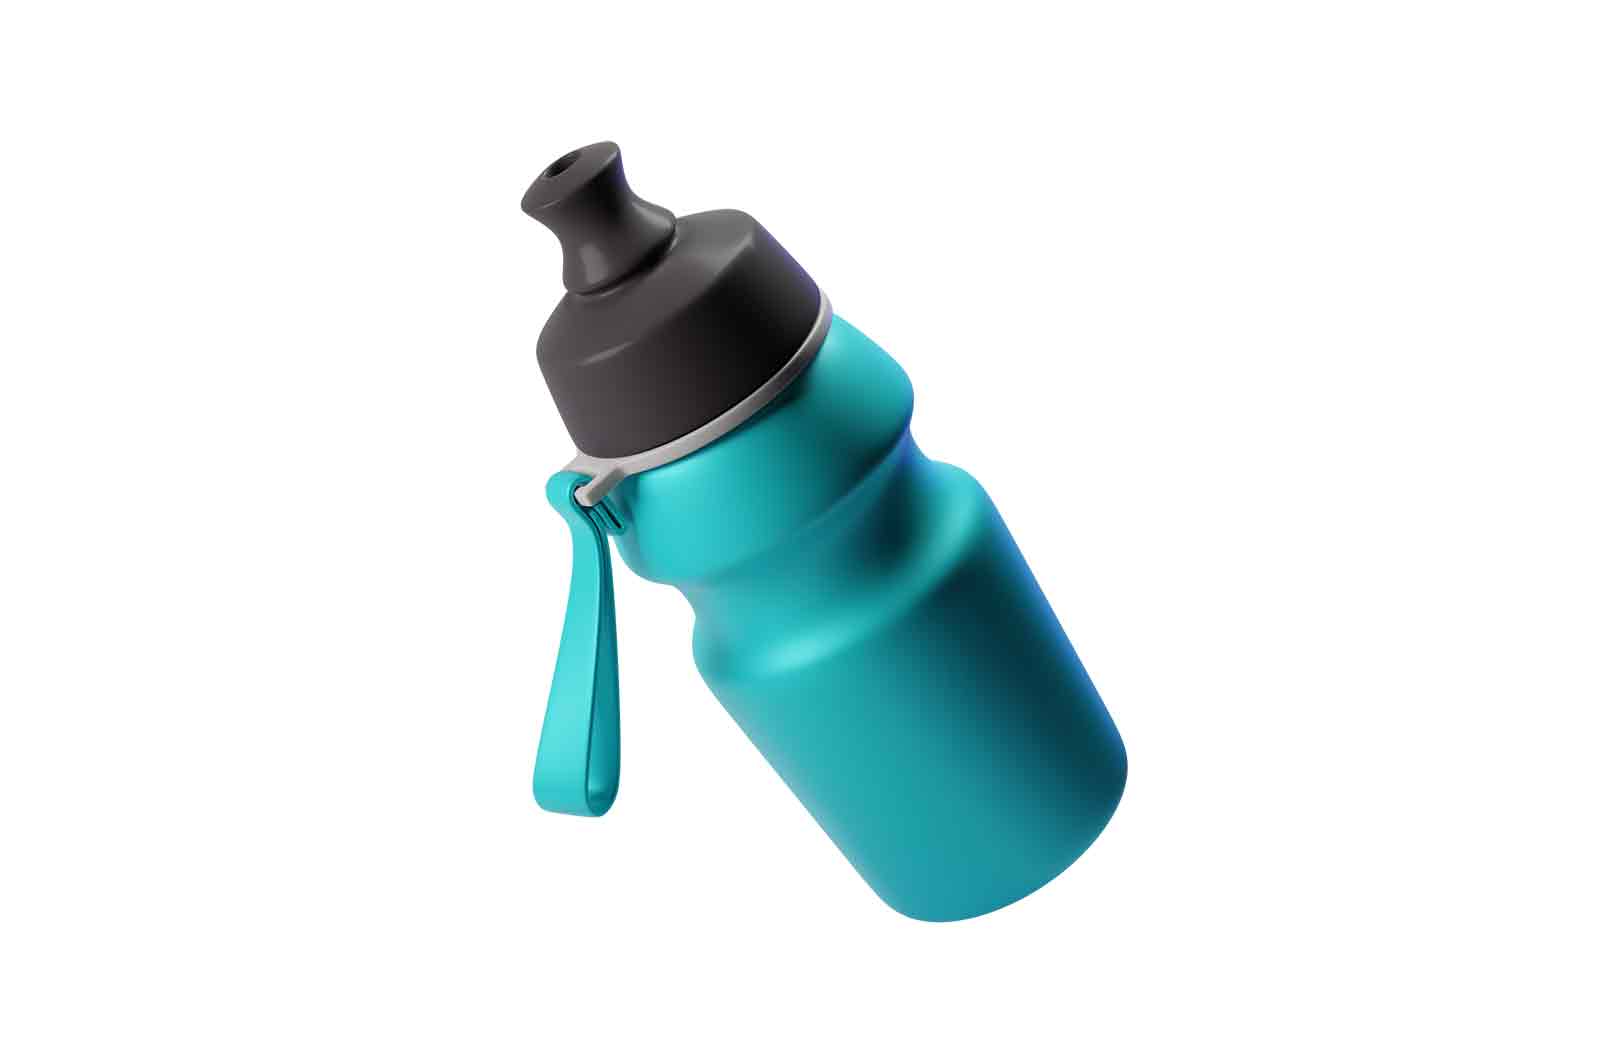 Sport fitness bottle, water flask 3d rendered illustration. Blue plastic container with cap for fitness, training, workout